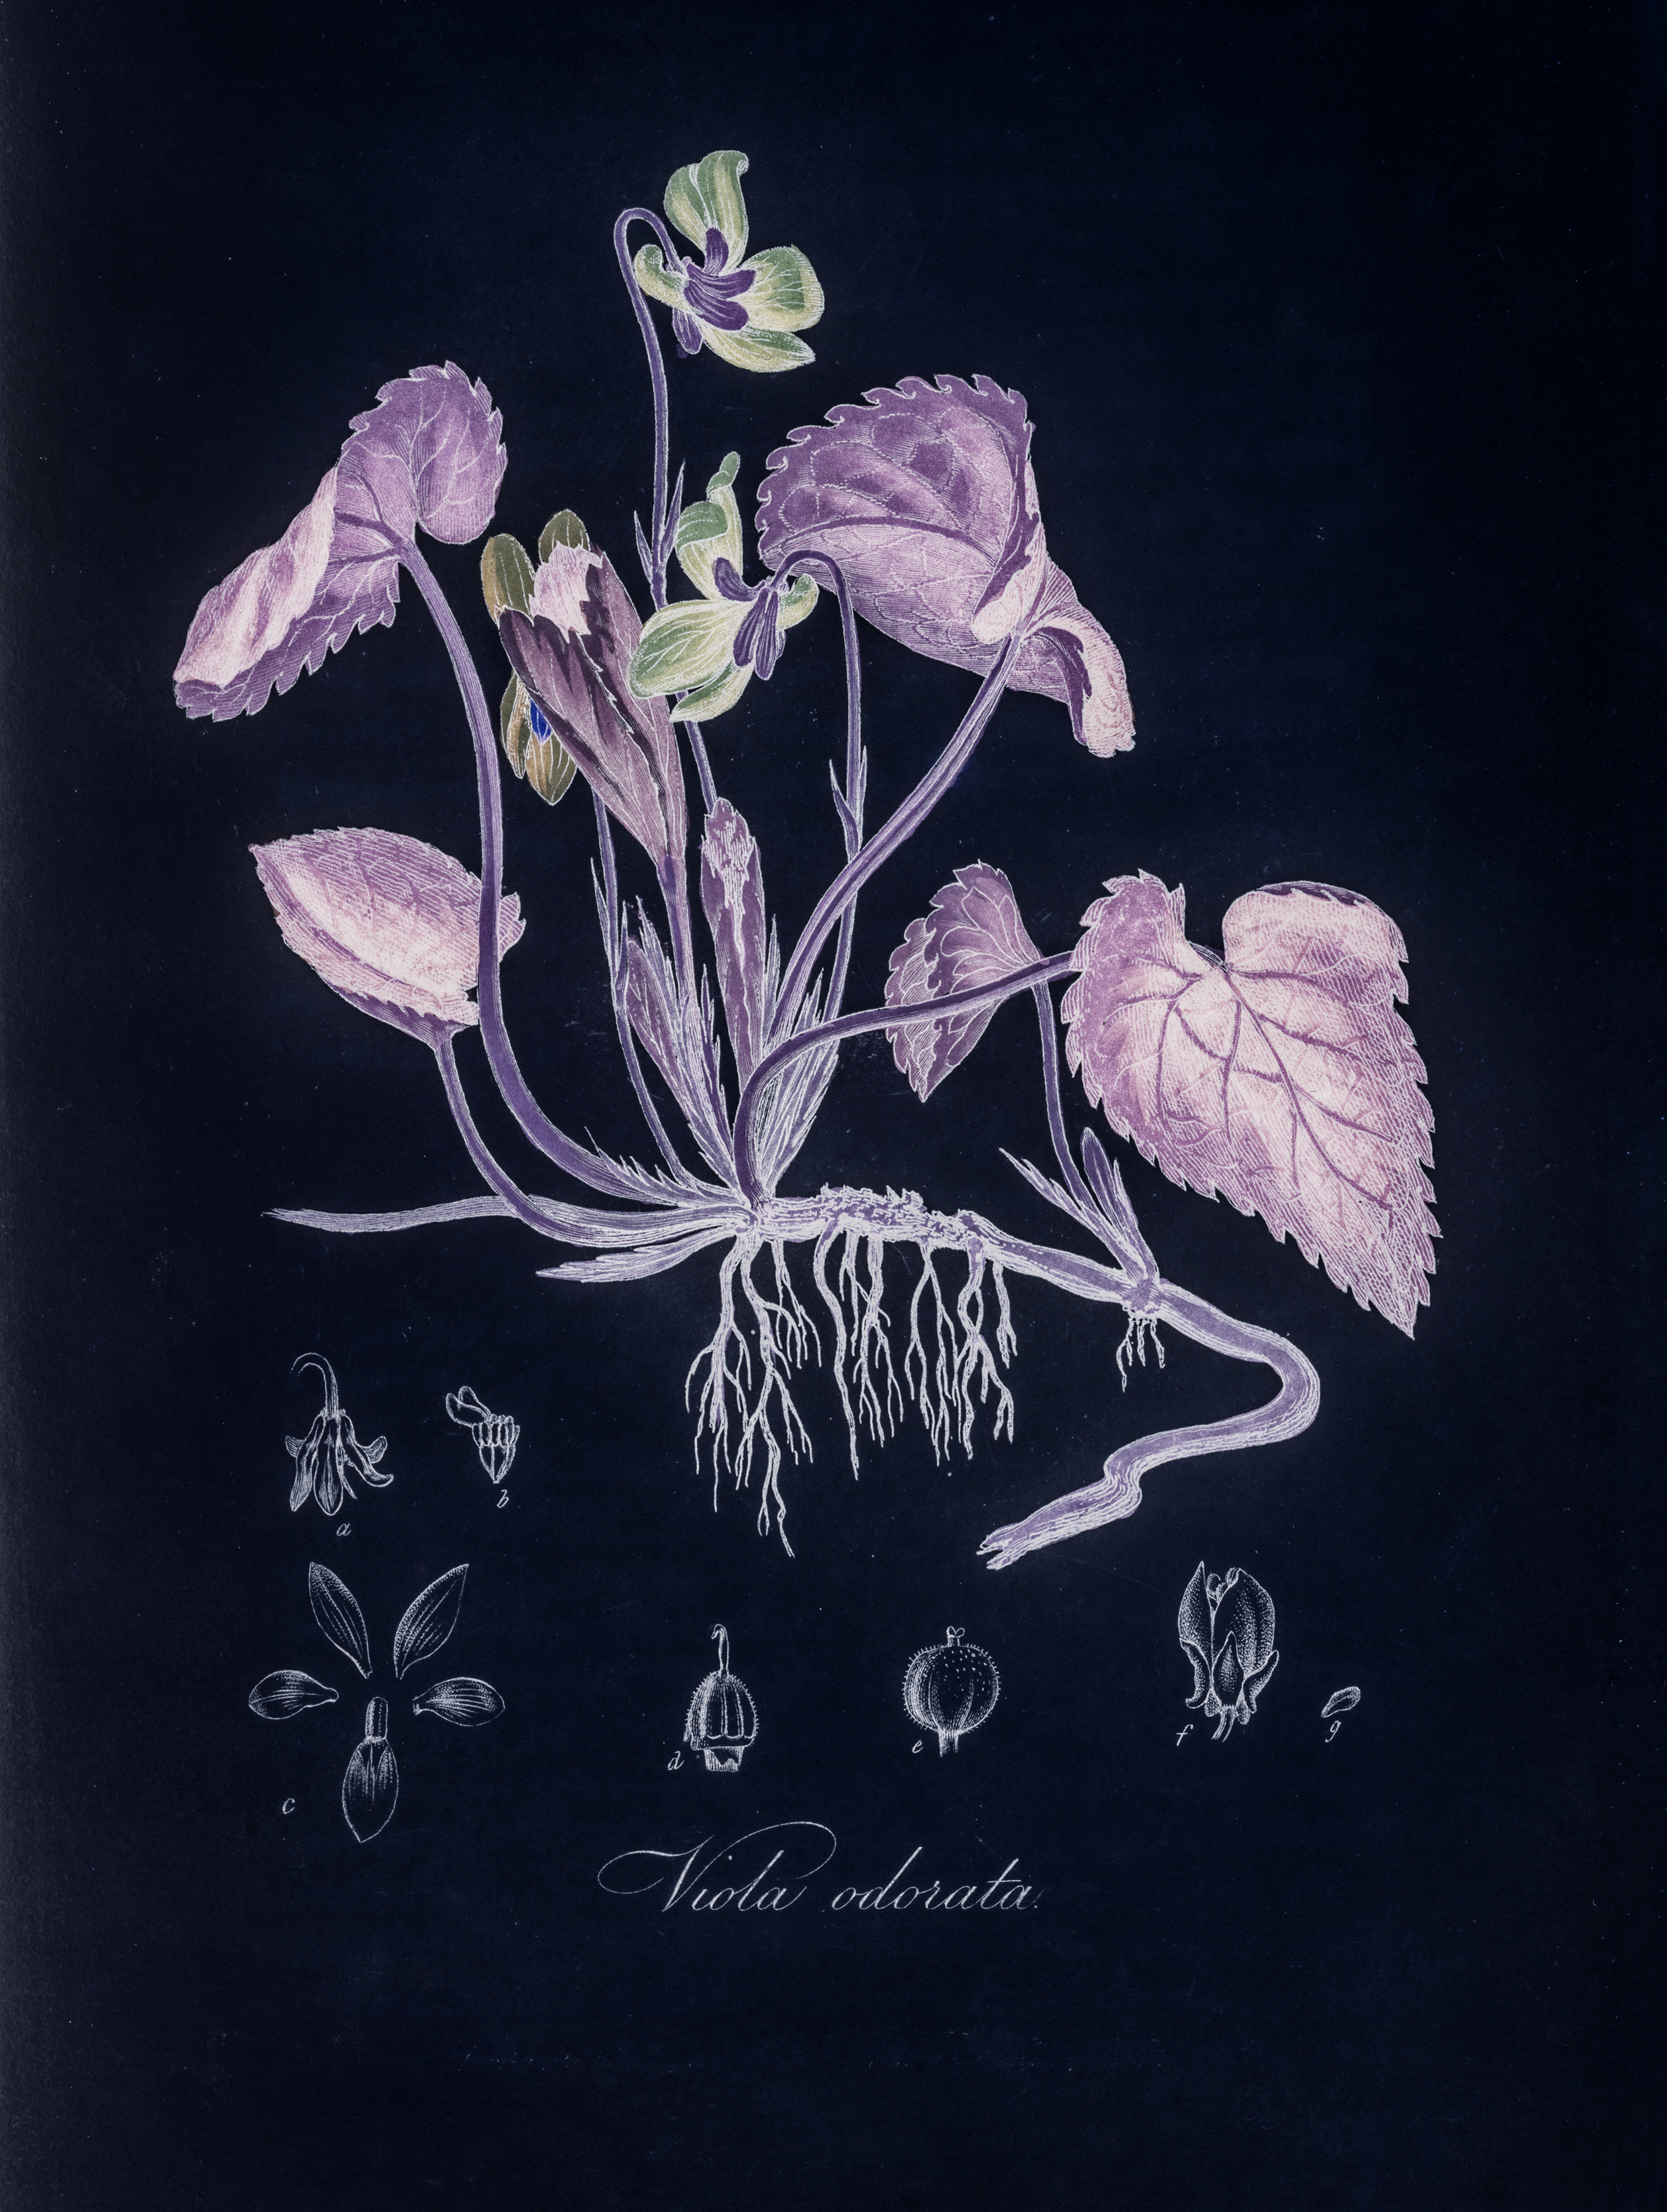 Evening Botanist: A Talk with Queer Botany